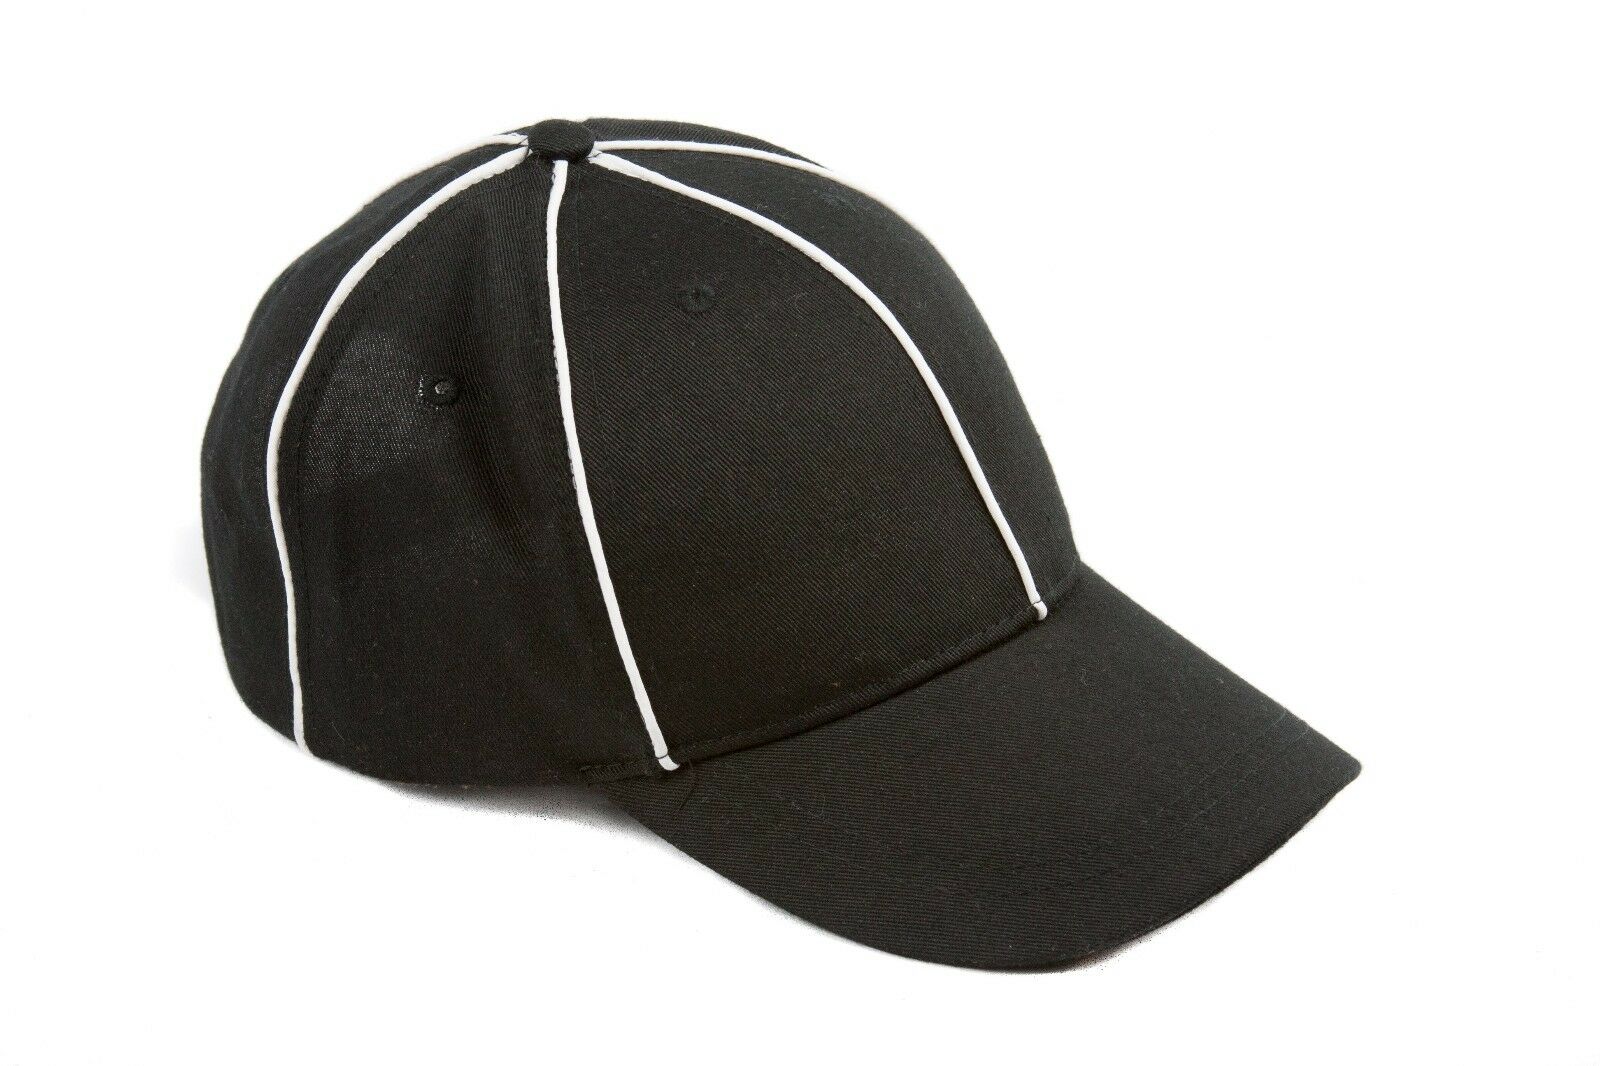 Murray Sporting Goods Referee Hat Black With White Stripes Official Referee Cap